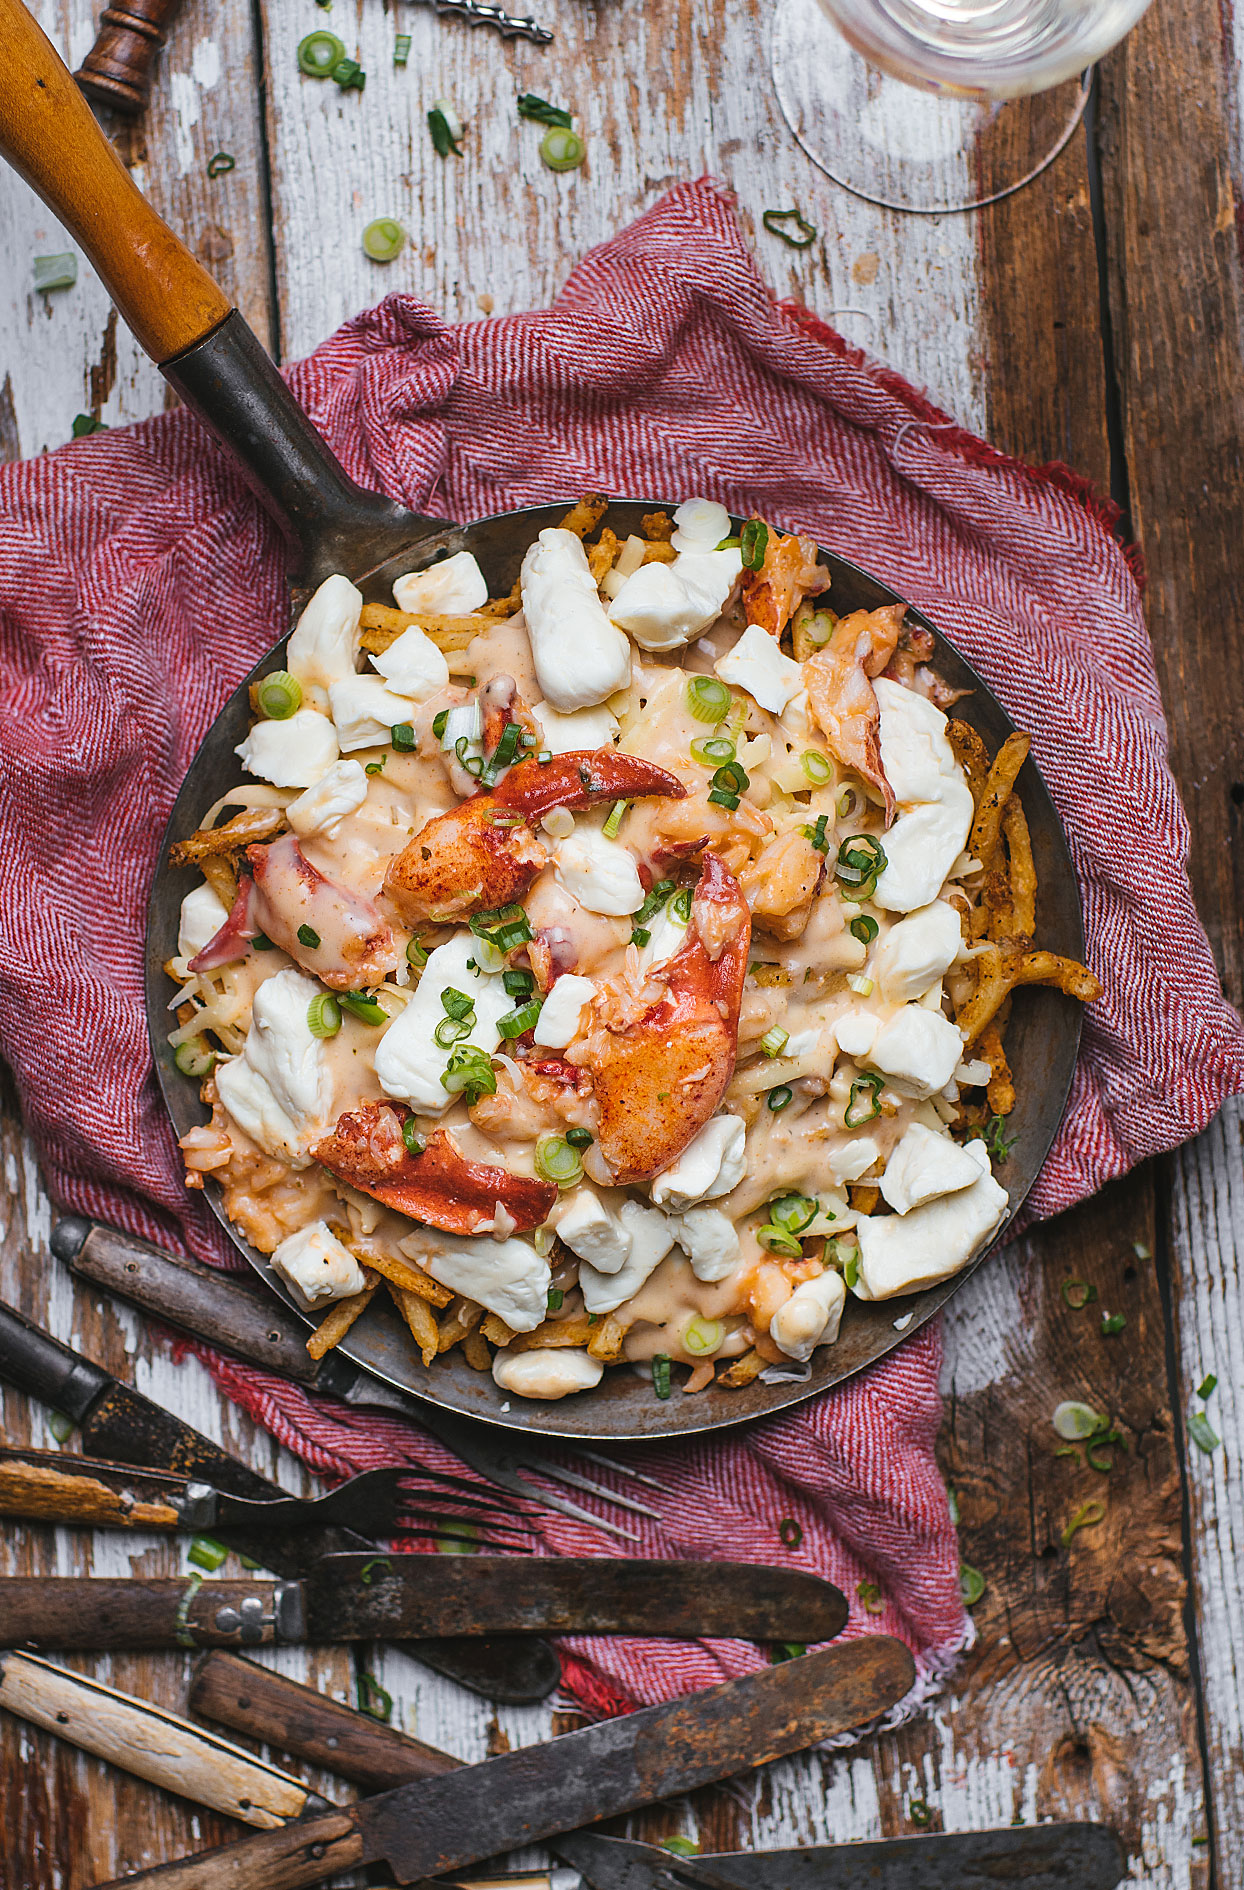 Lobster poutine with bisque sauce